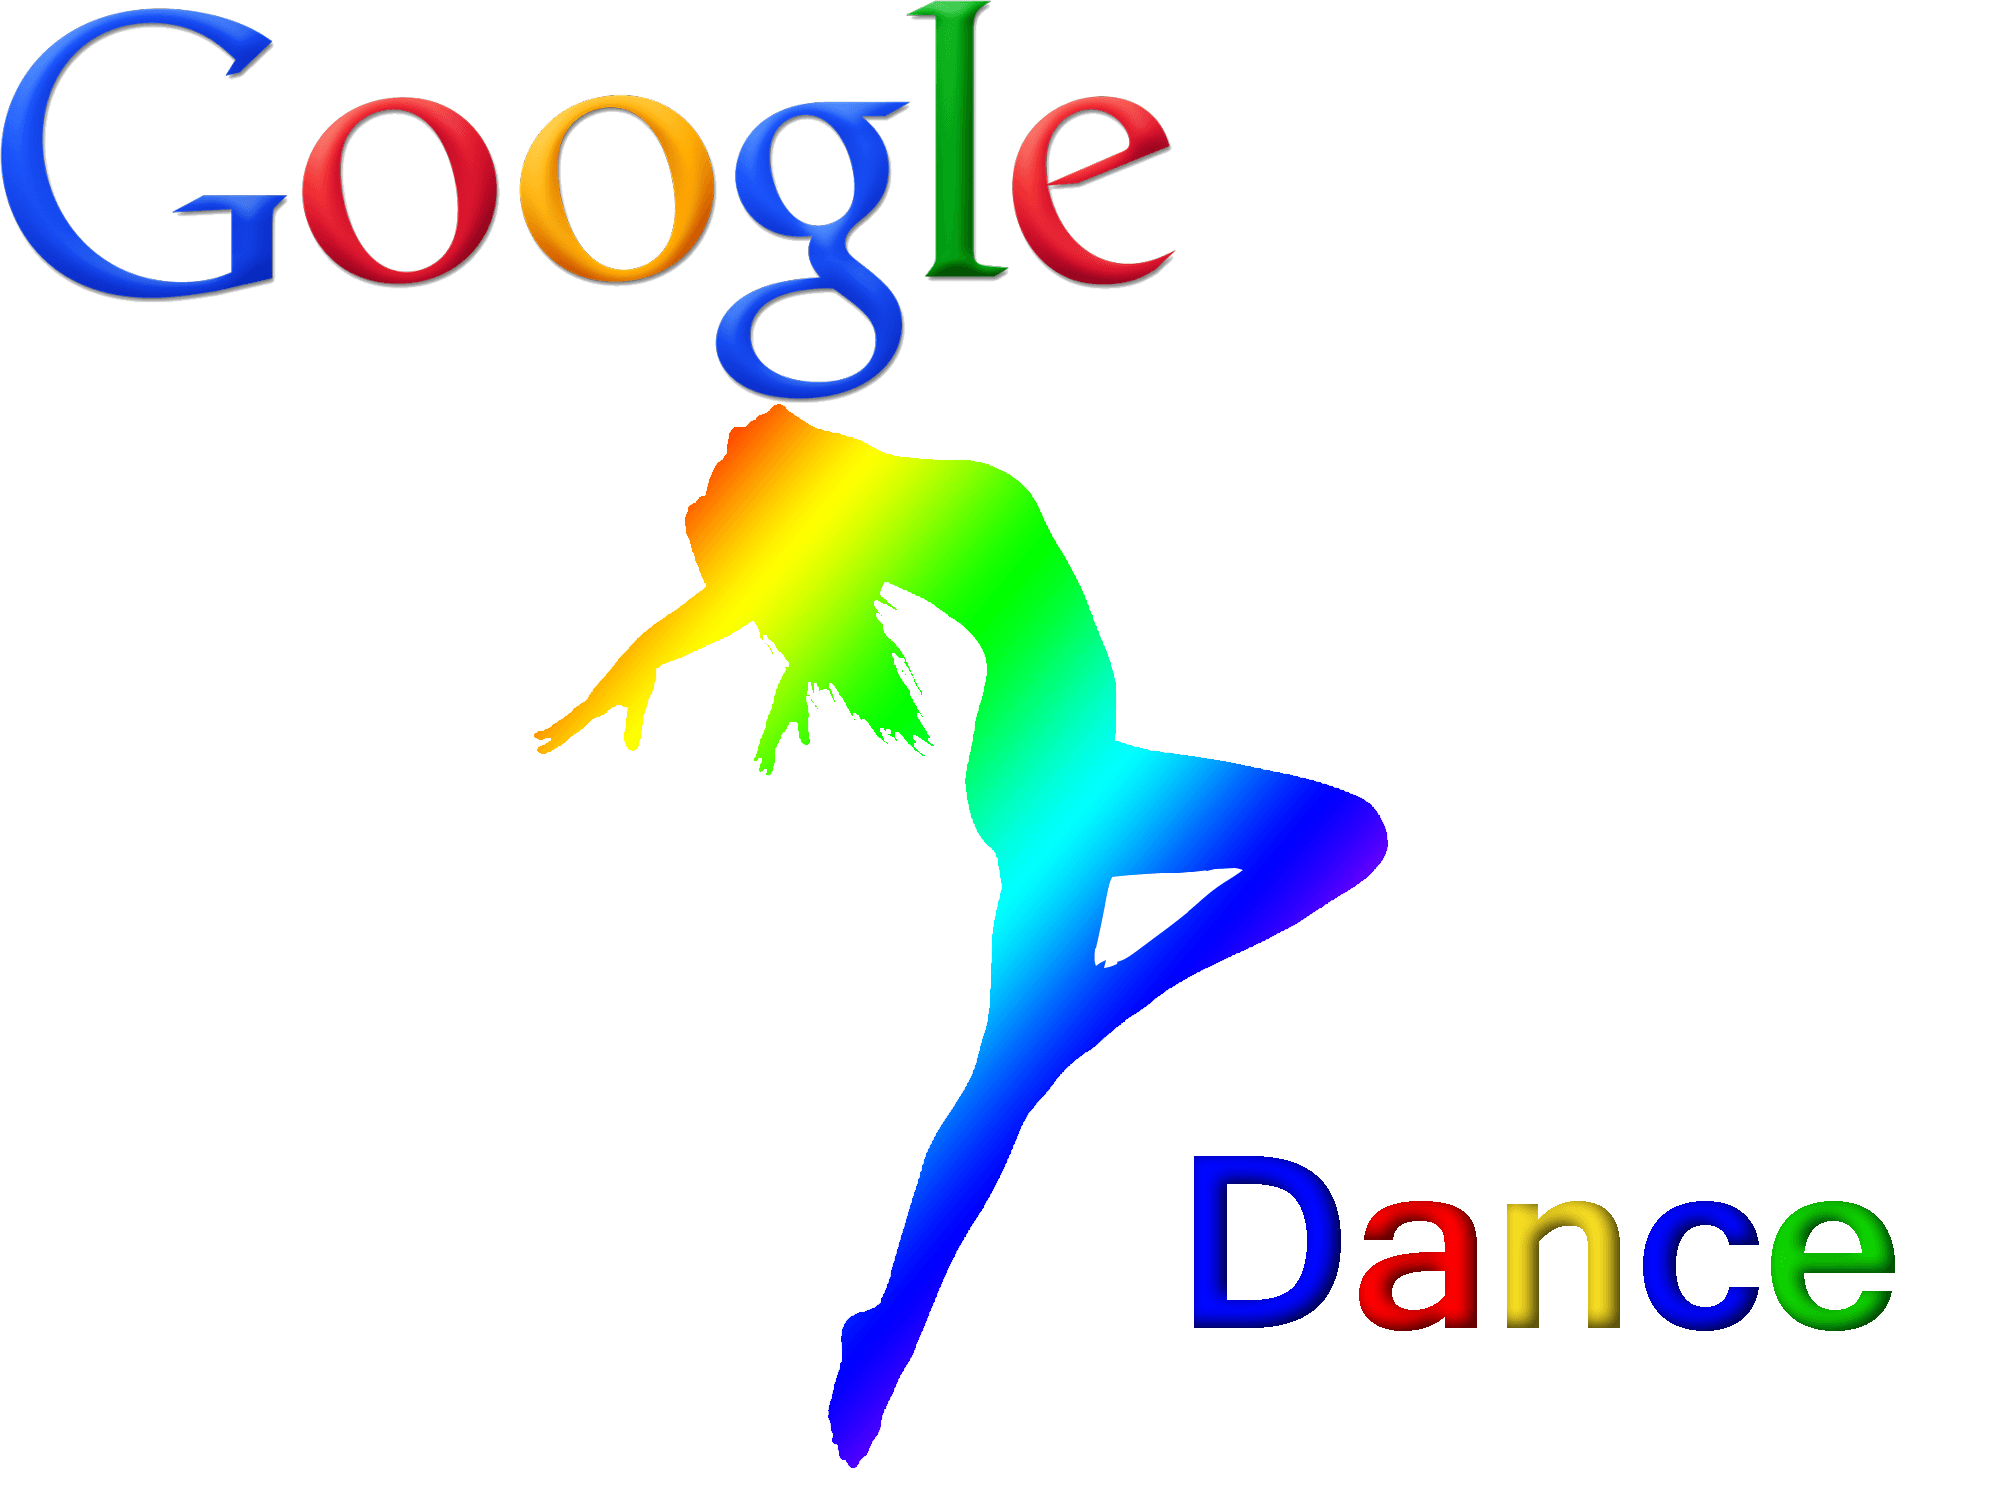 What is the Google Dance?